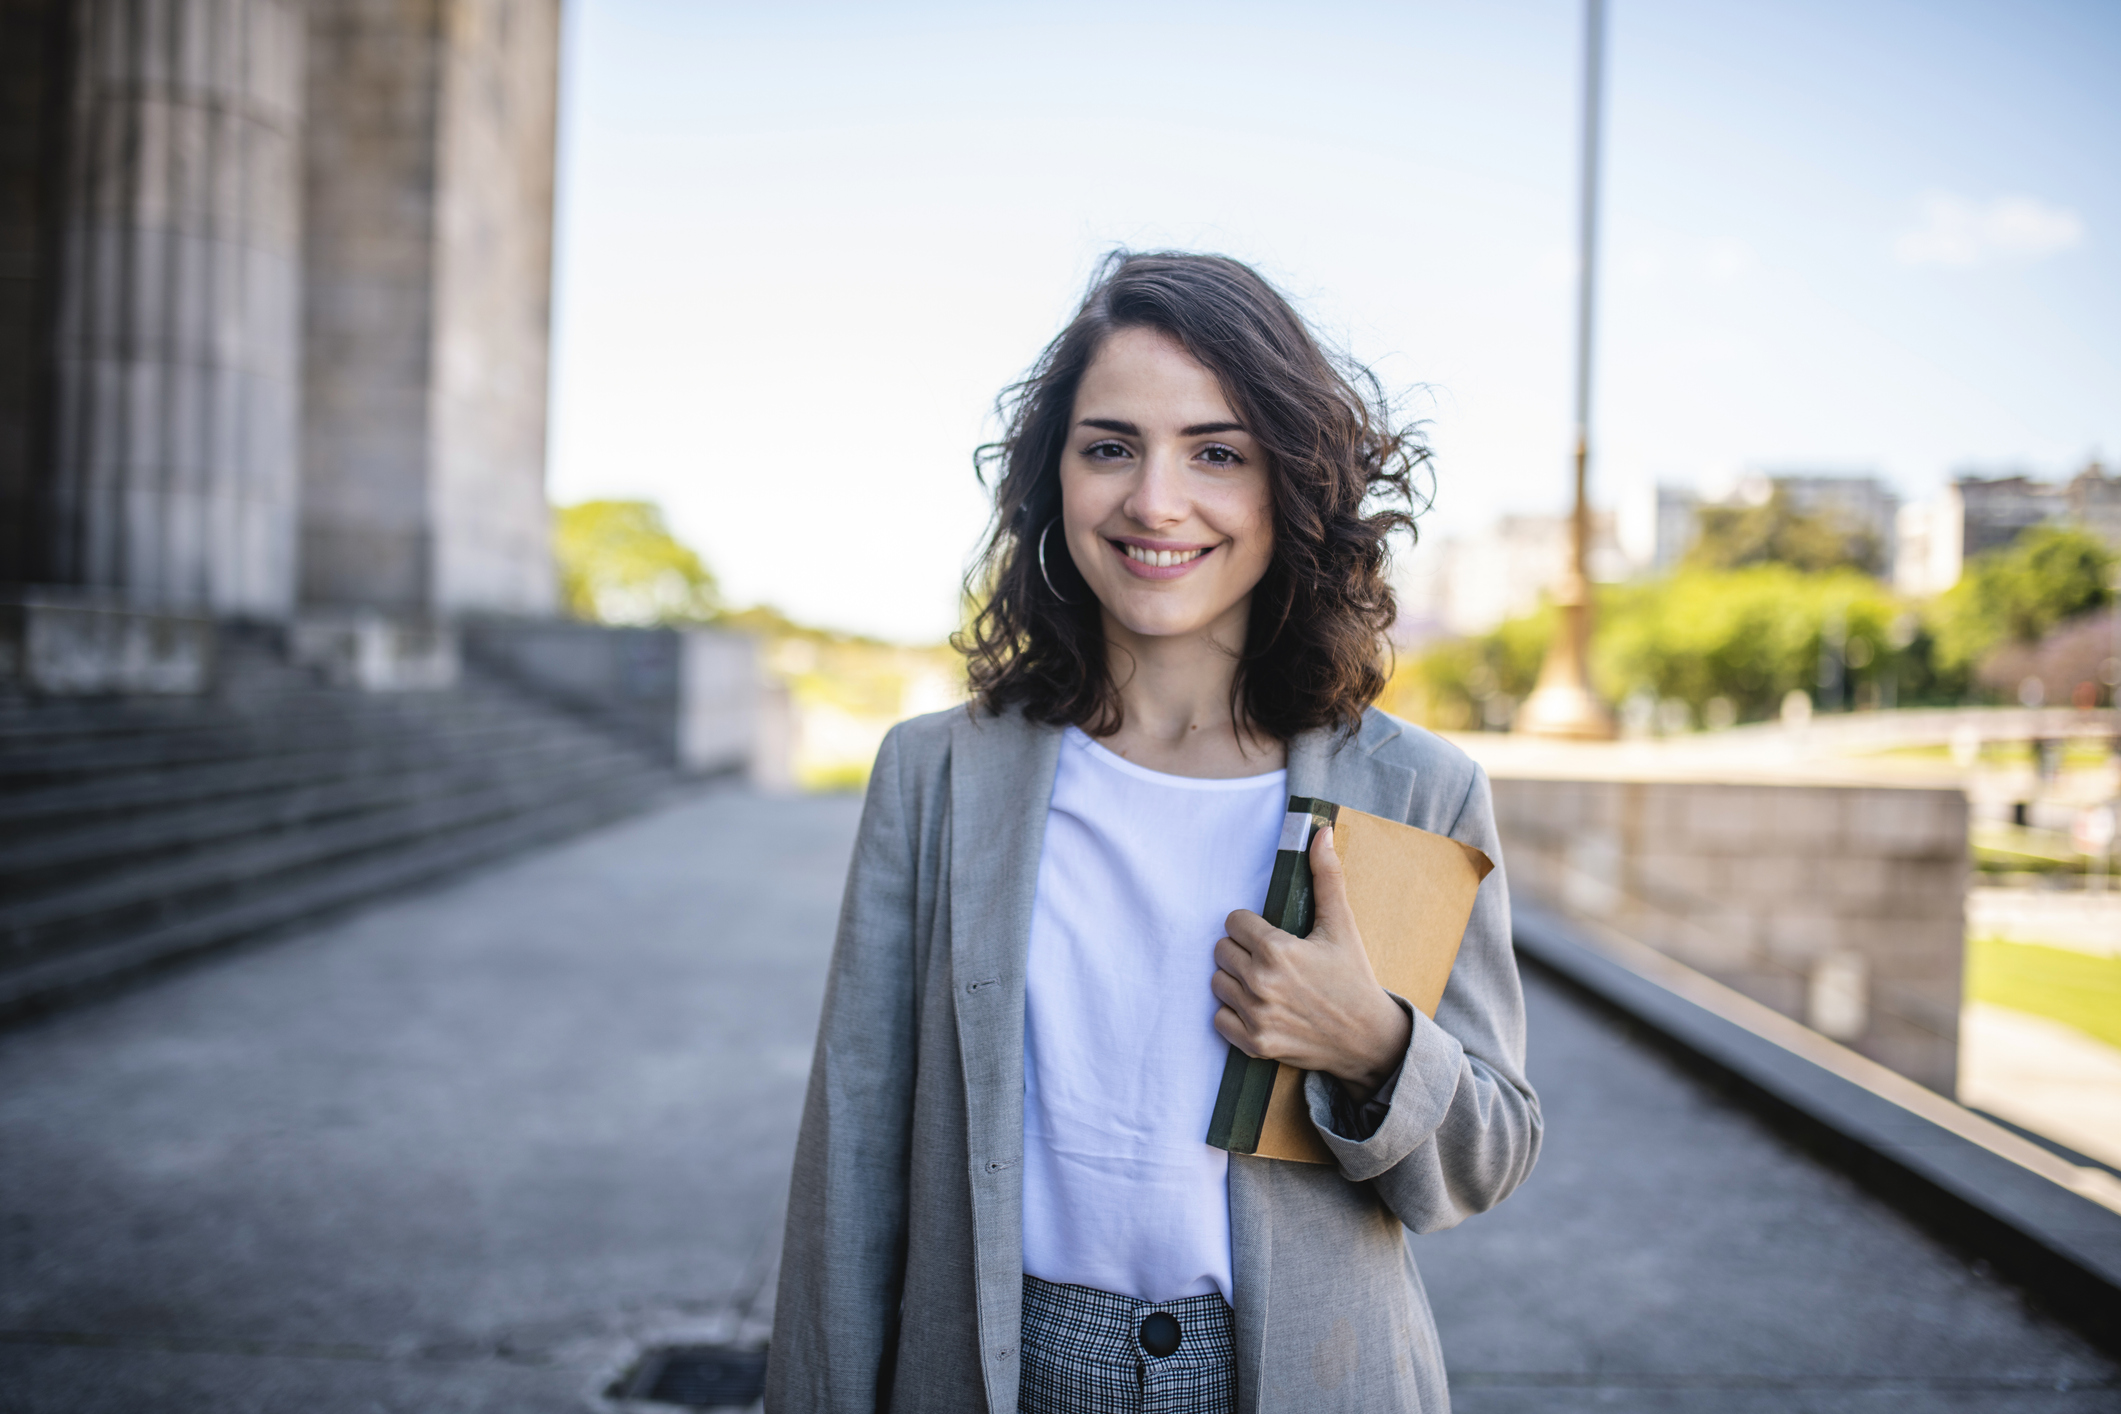 Female smiling holding a book in front of building